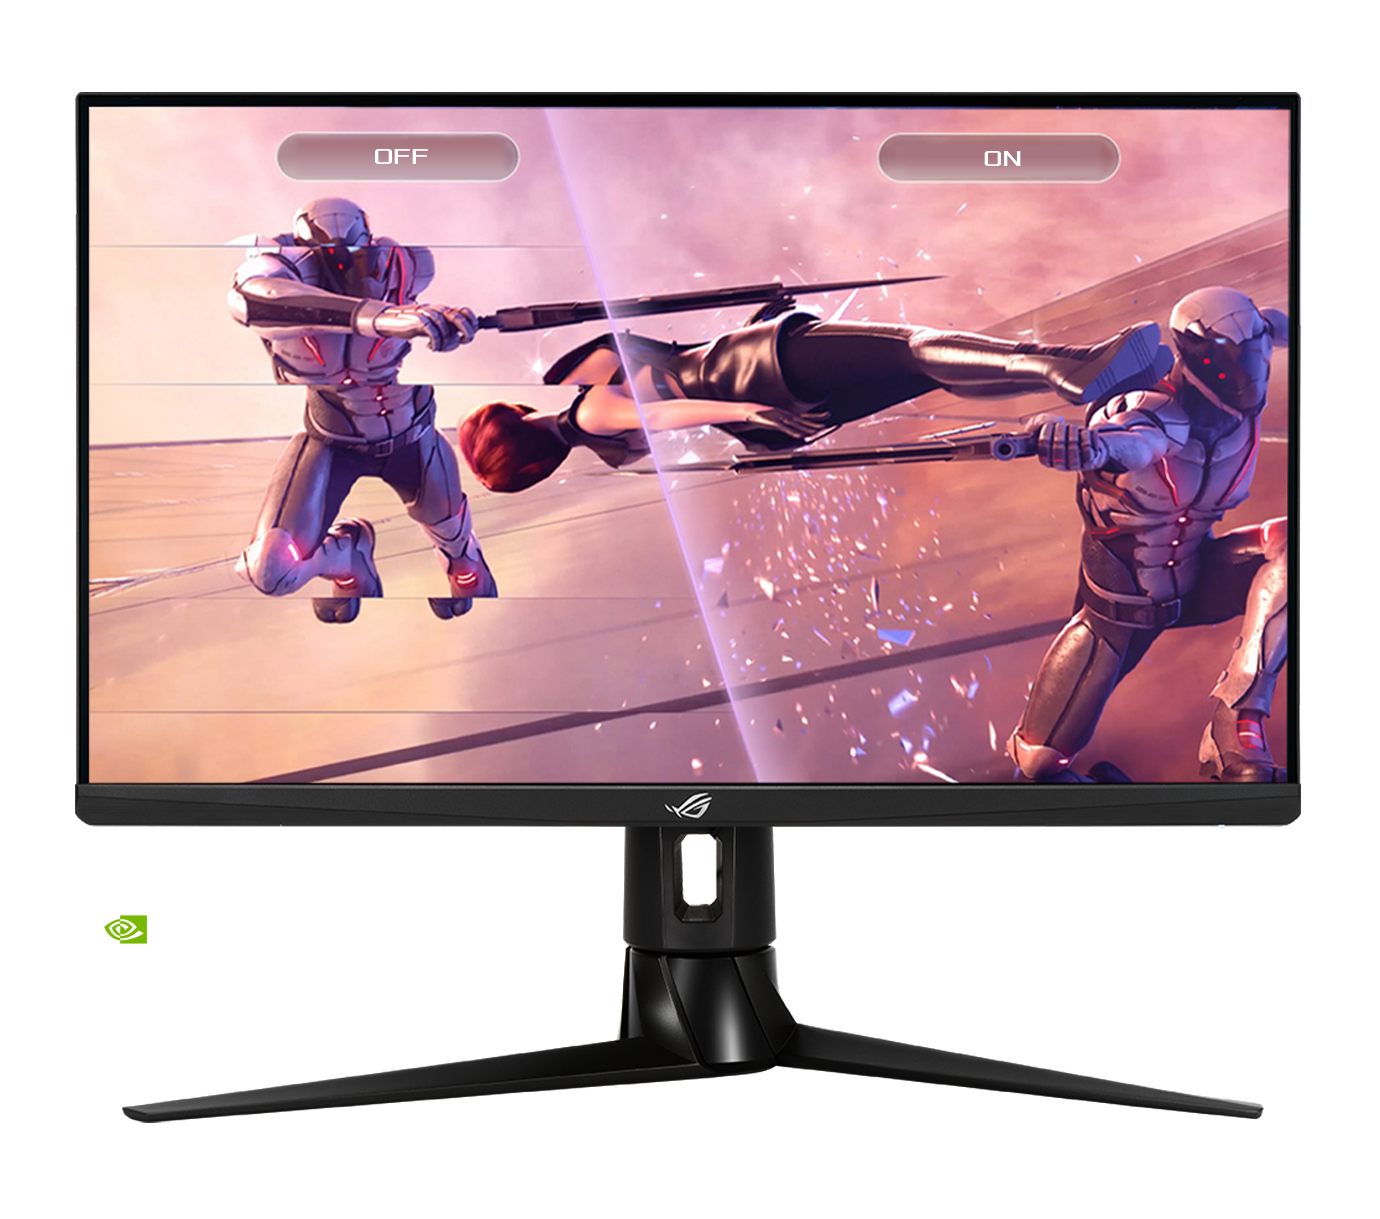 NVIDIA G-SYNC compatible and AMD FreeSync Premium technology